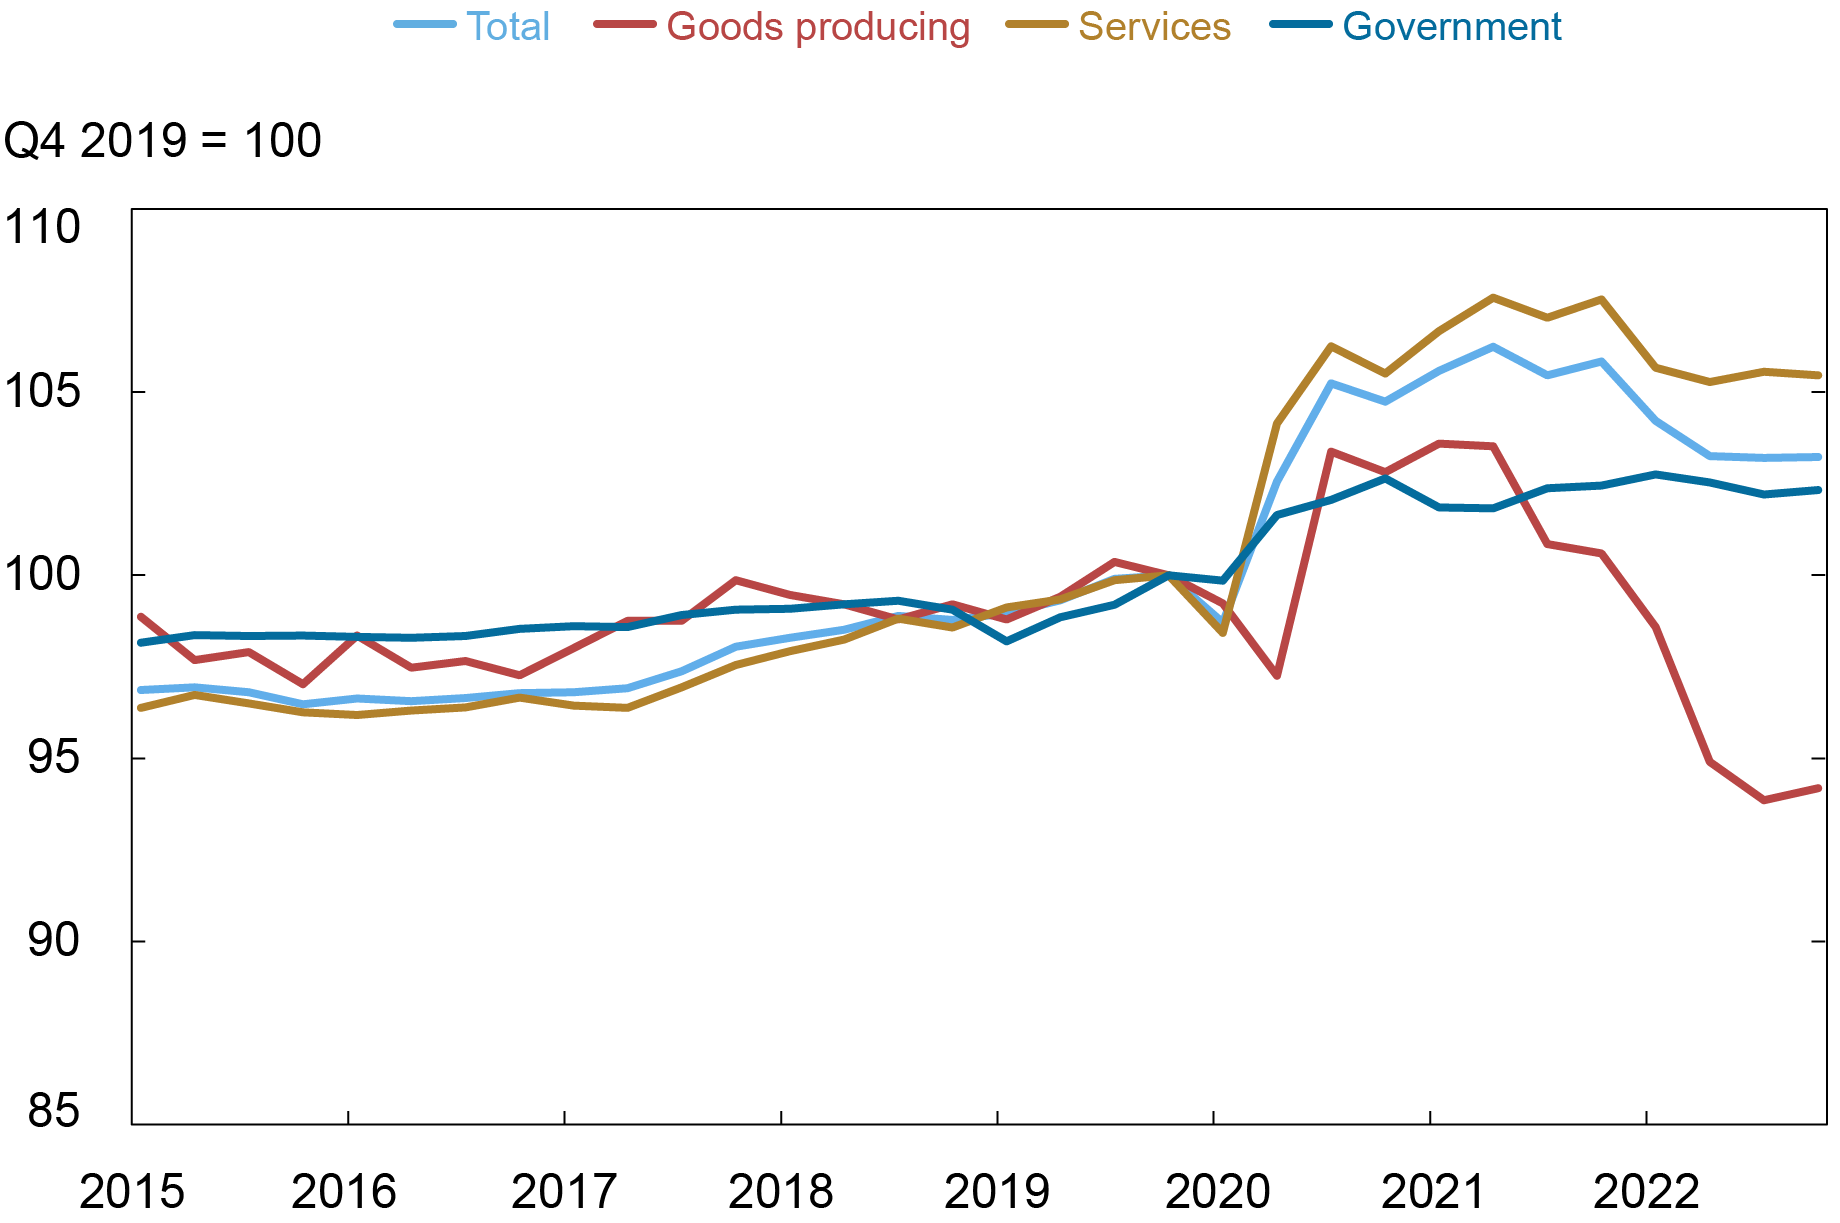 Liberty Street Economics line chart showing the output per worker in the goods producing, services, and government sectors since 2014, with the values indexed so that 2019:Q4=100. While productivity was flat for the whole economy in 2021, output per worker in the goods producing sector was unusually low at the end of 2022.